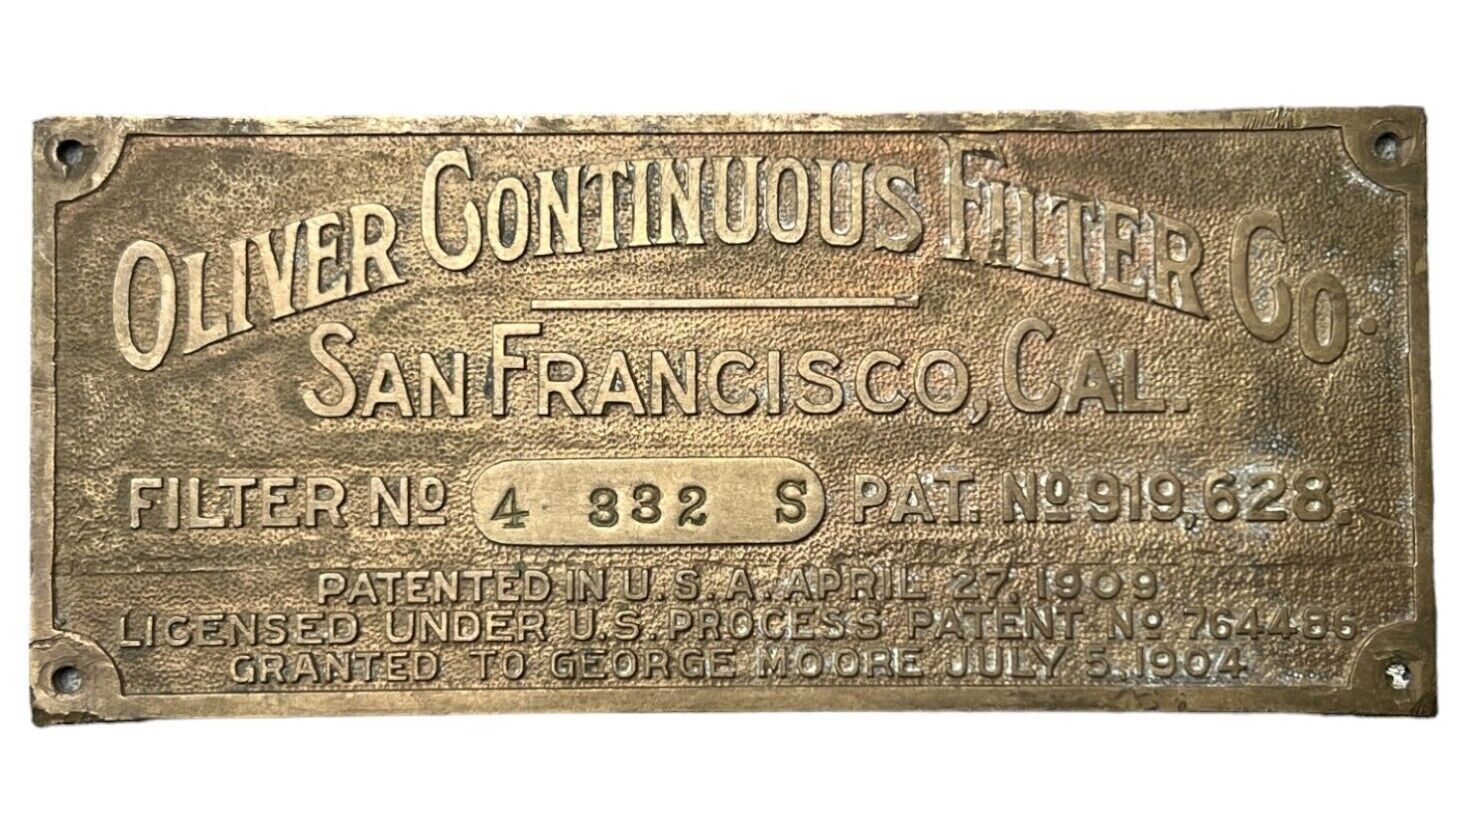 VINTAGE PLAQUE SIGN OLIVER CONTINUOUS FILTER Co. SAN FRANCISCO, CAL USA GHOST TO